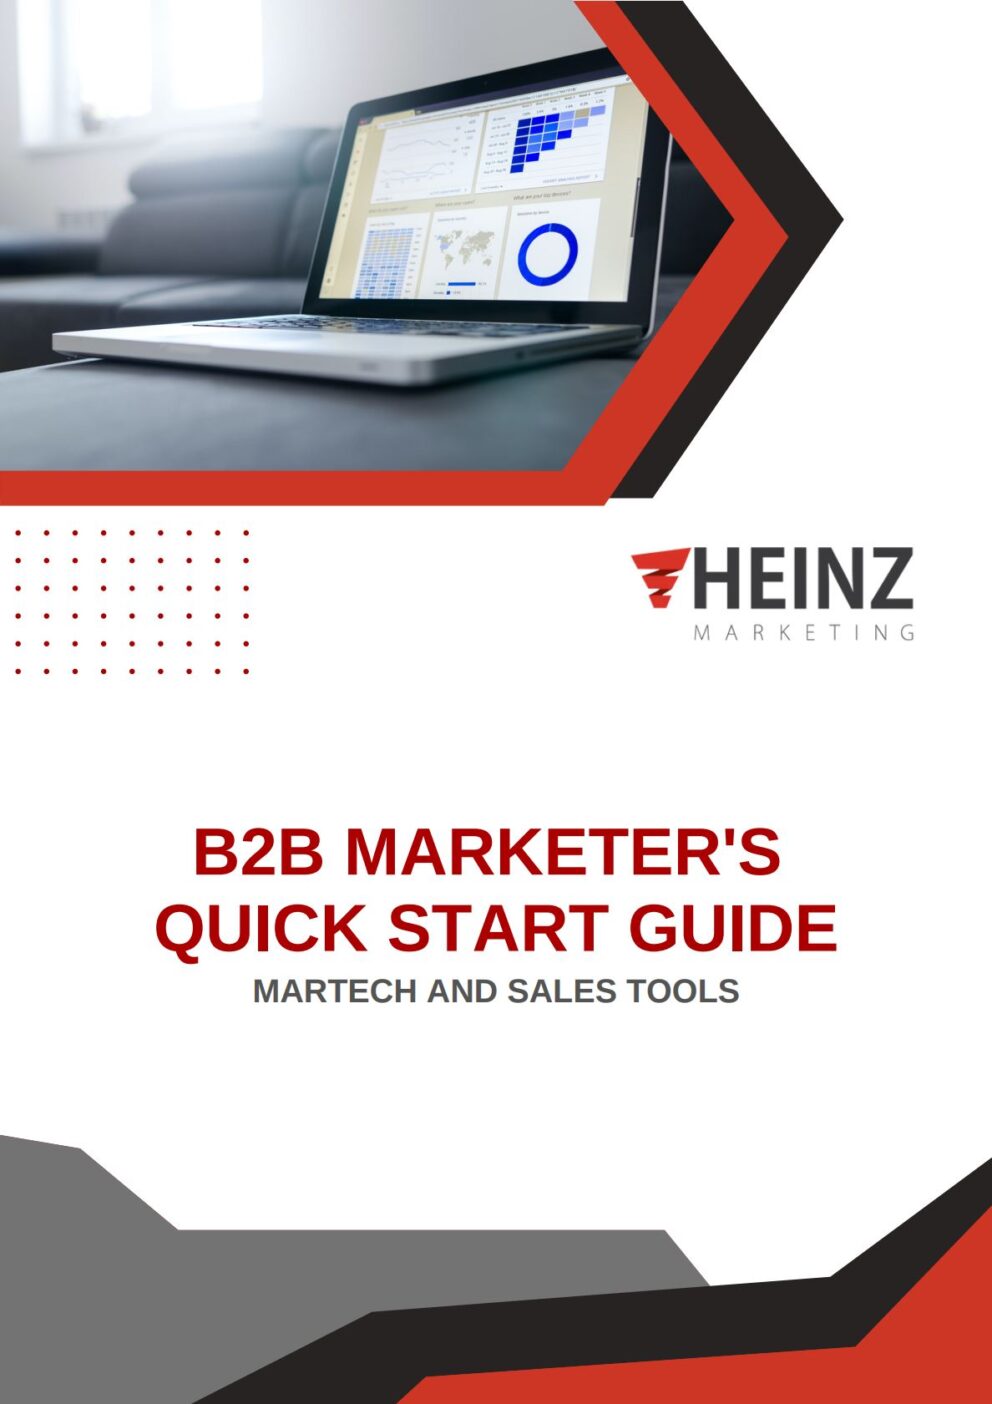 Guide: B2B Marketer’s Quick Start Guide to MarTech and Sales Tools